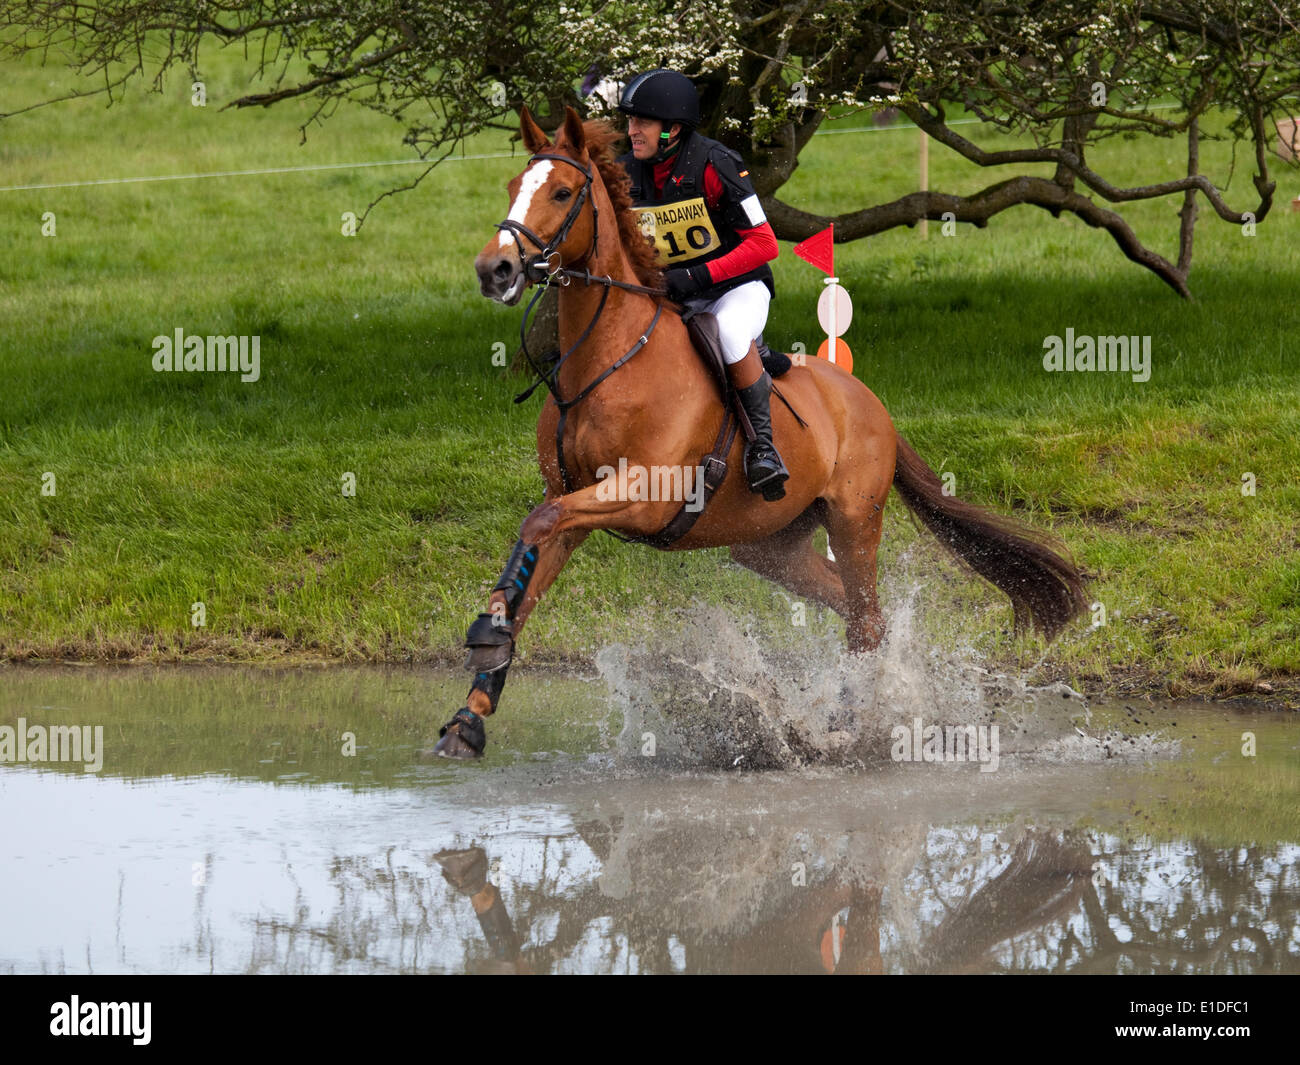 Belsay, England - May 31, 2014: A competitor in the cross country section takes the water splash during the 2014 Belsay Horse Trials, held for the second year running in the grounds of Belsay Castle in Northumberland, England. Belsay Castle is managed by English Heritage and is open to the public all year. Stock Photo